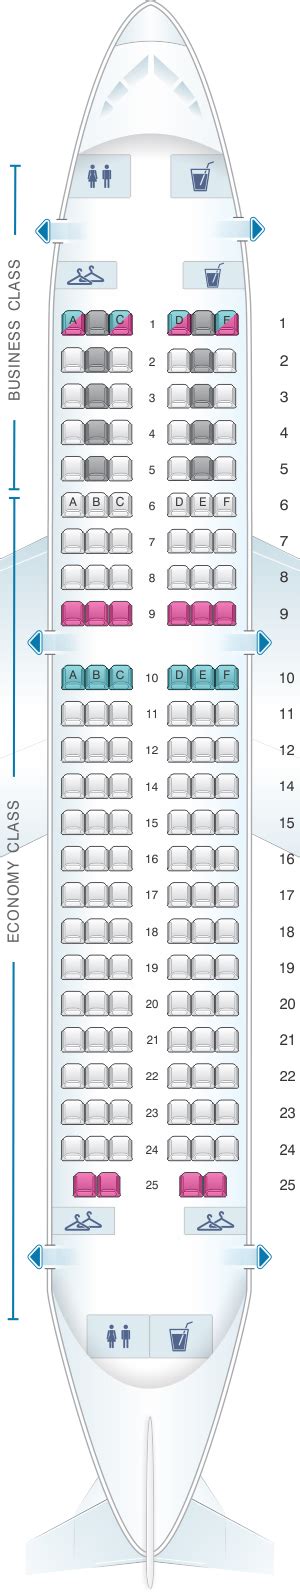 Seat Map Air France Airbus A319 Europe V1 Seatmaestro